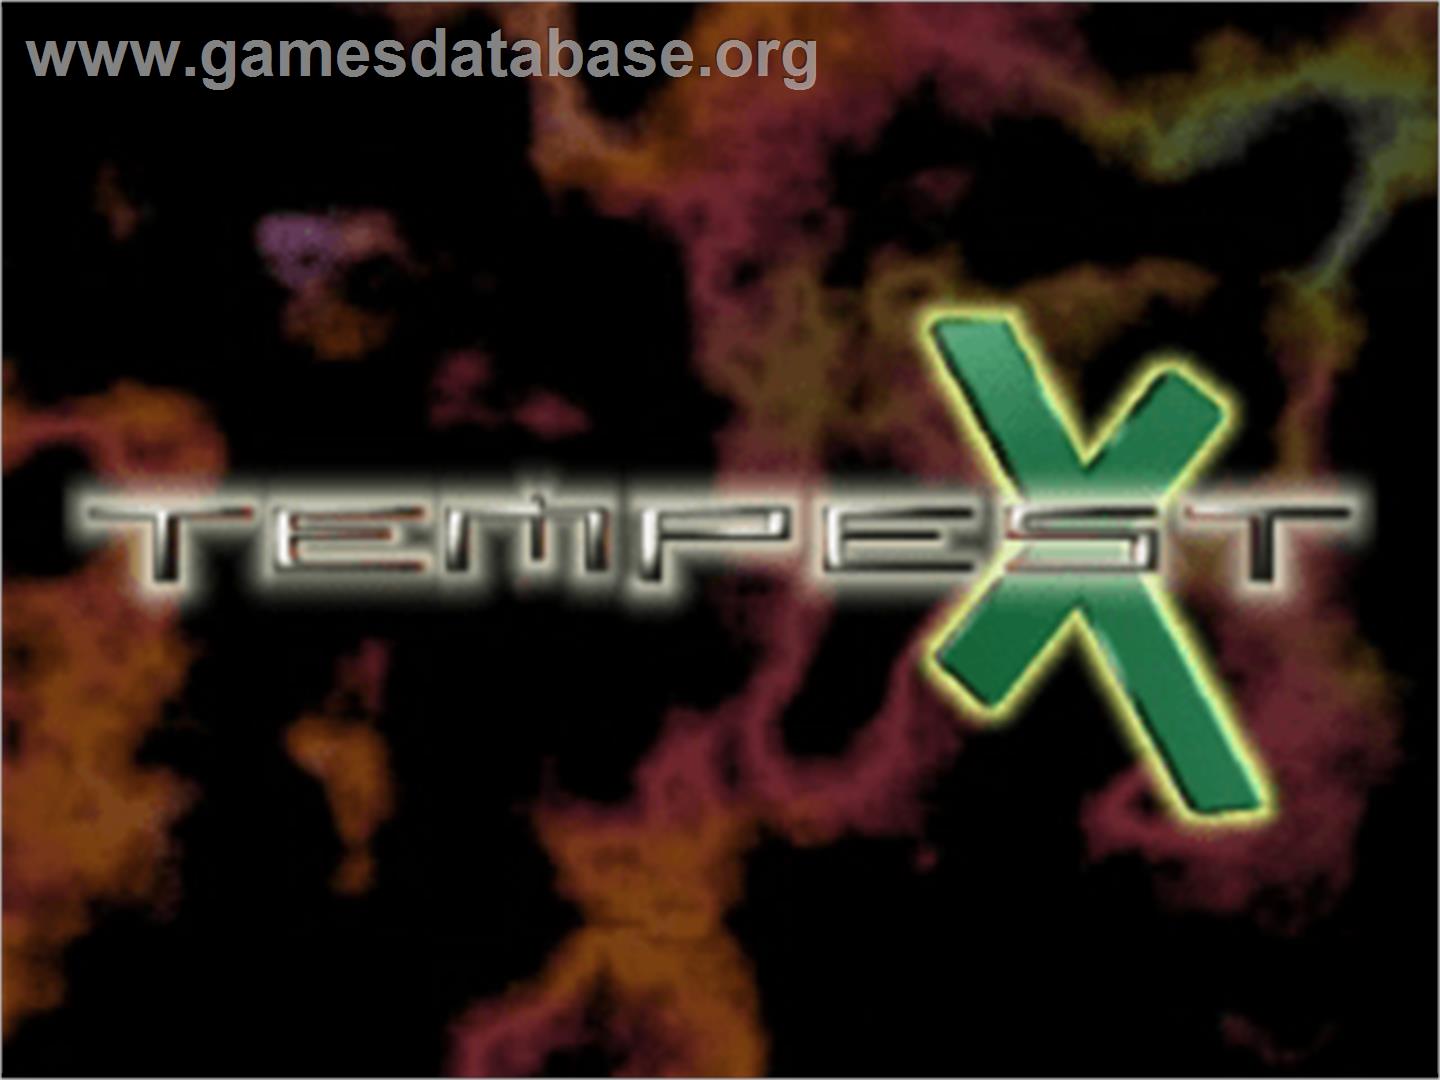 Tempest X3 - Sony Playstation - Artwork - Title Screen